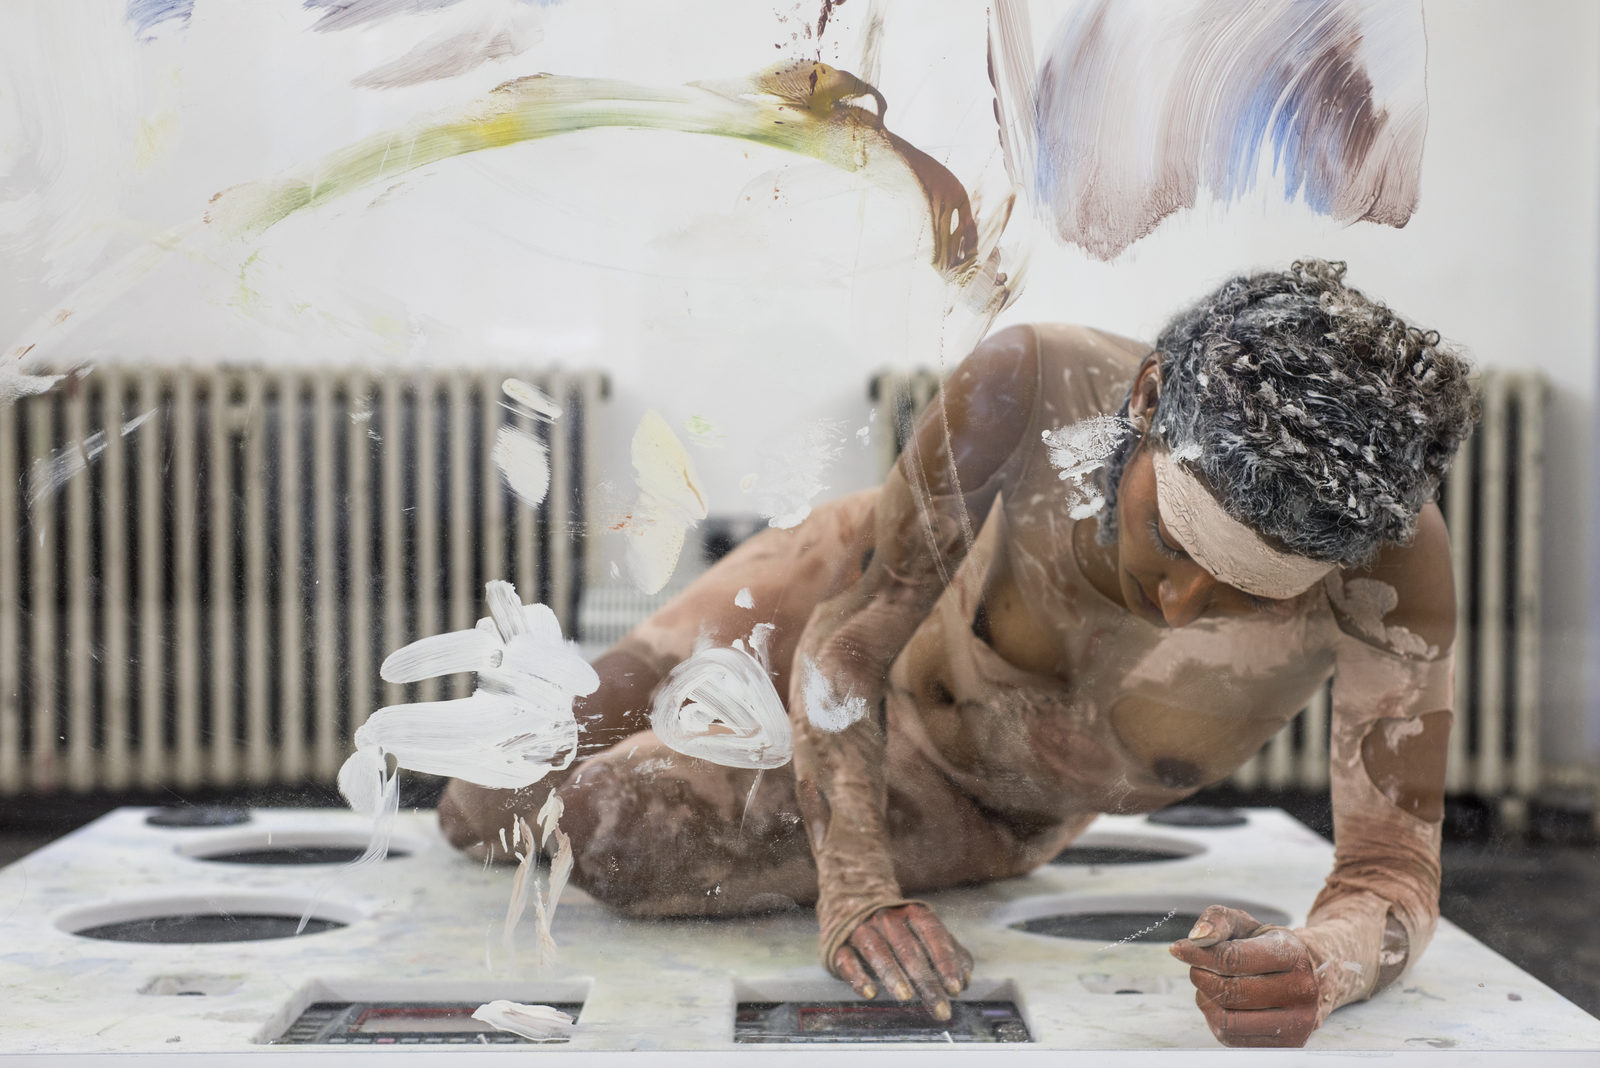 Donna Huanca - Scar Cymbals - performance 07.10.16 - Image Thierry Bal1